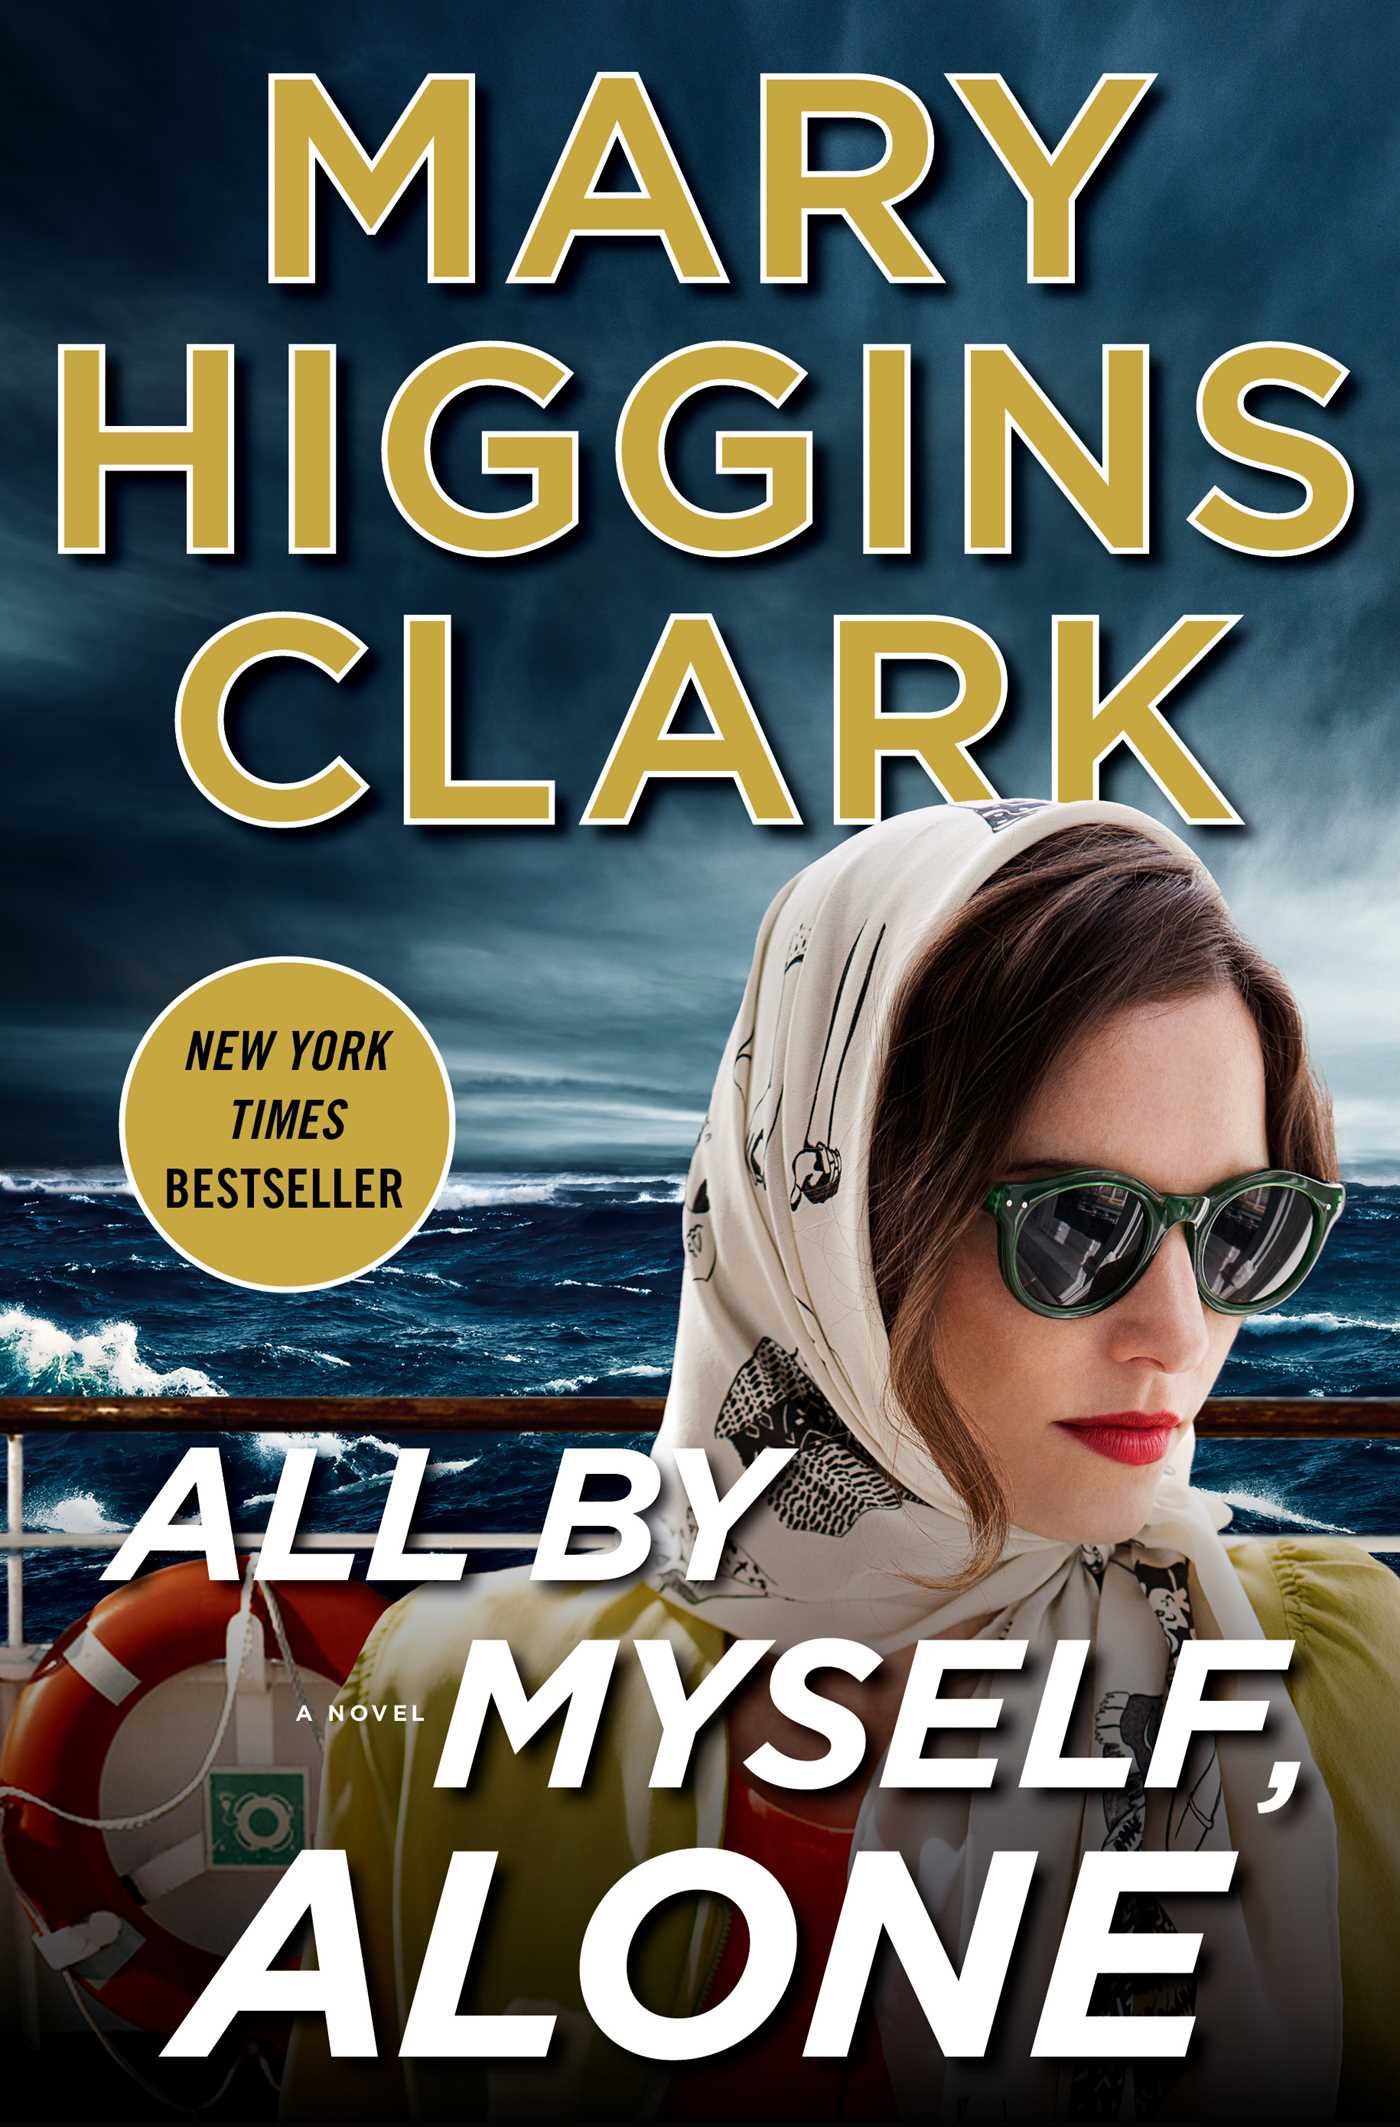 All by Myself, Alone by Mary Higgins Clark | Lambert's Literary Lighthouse